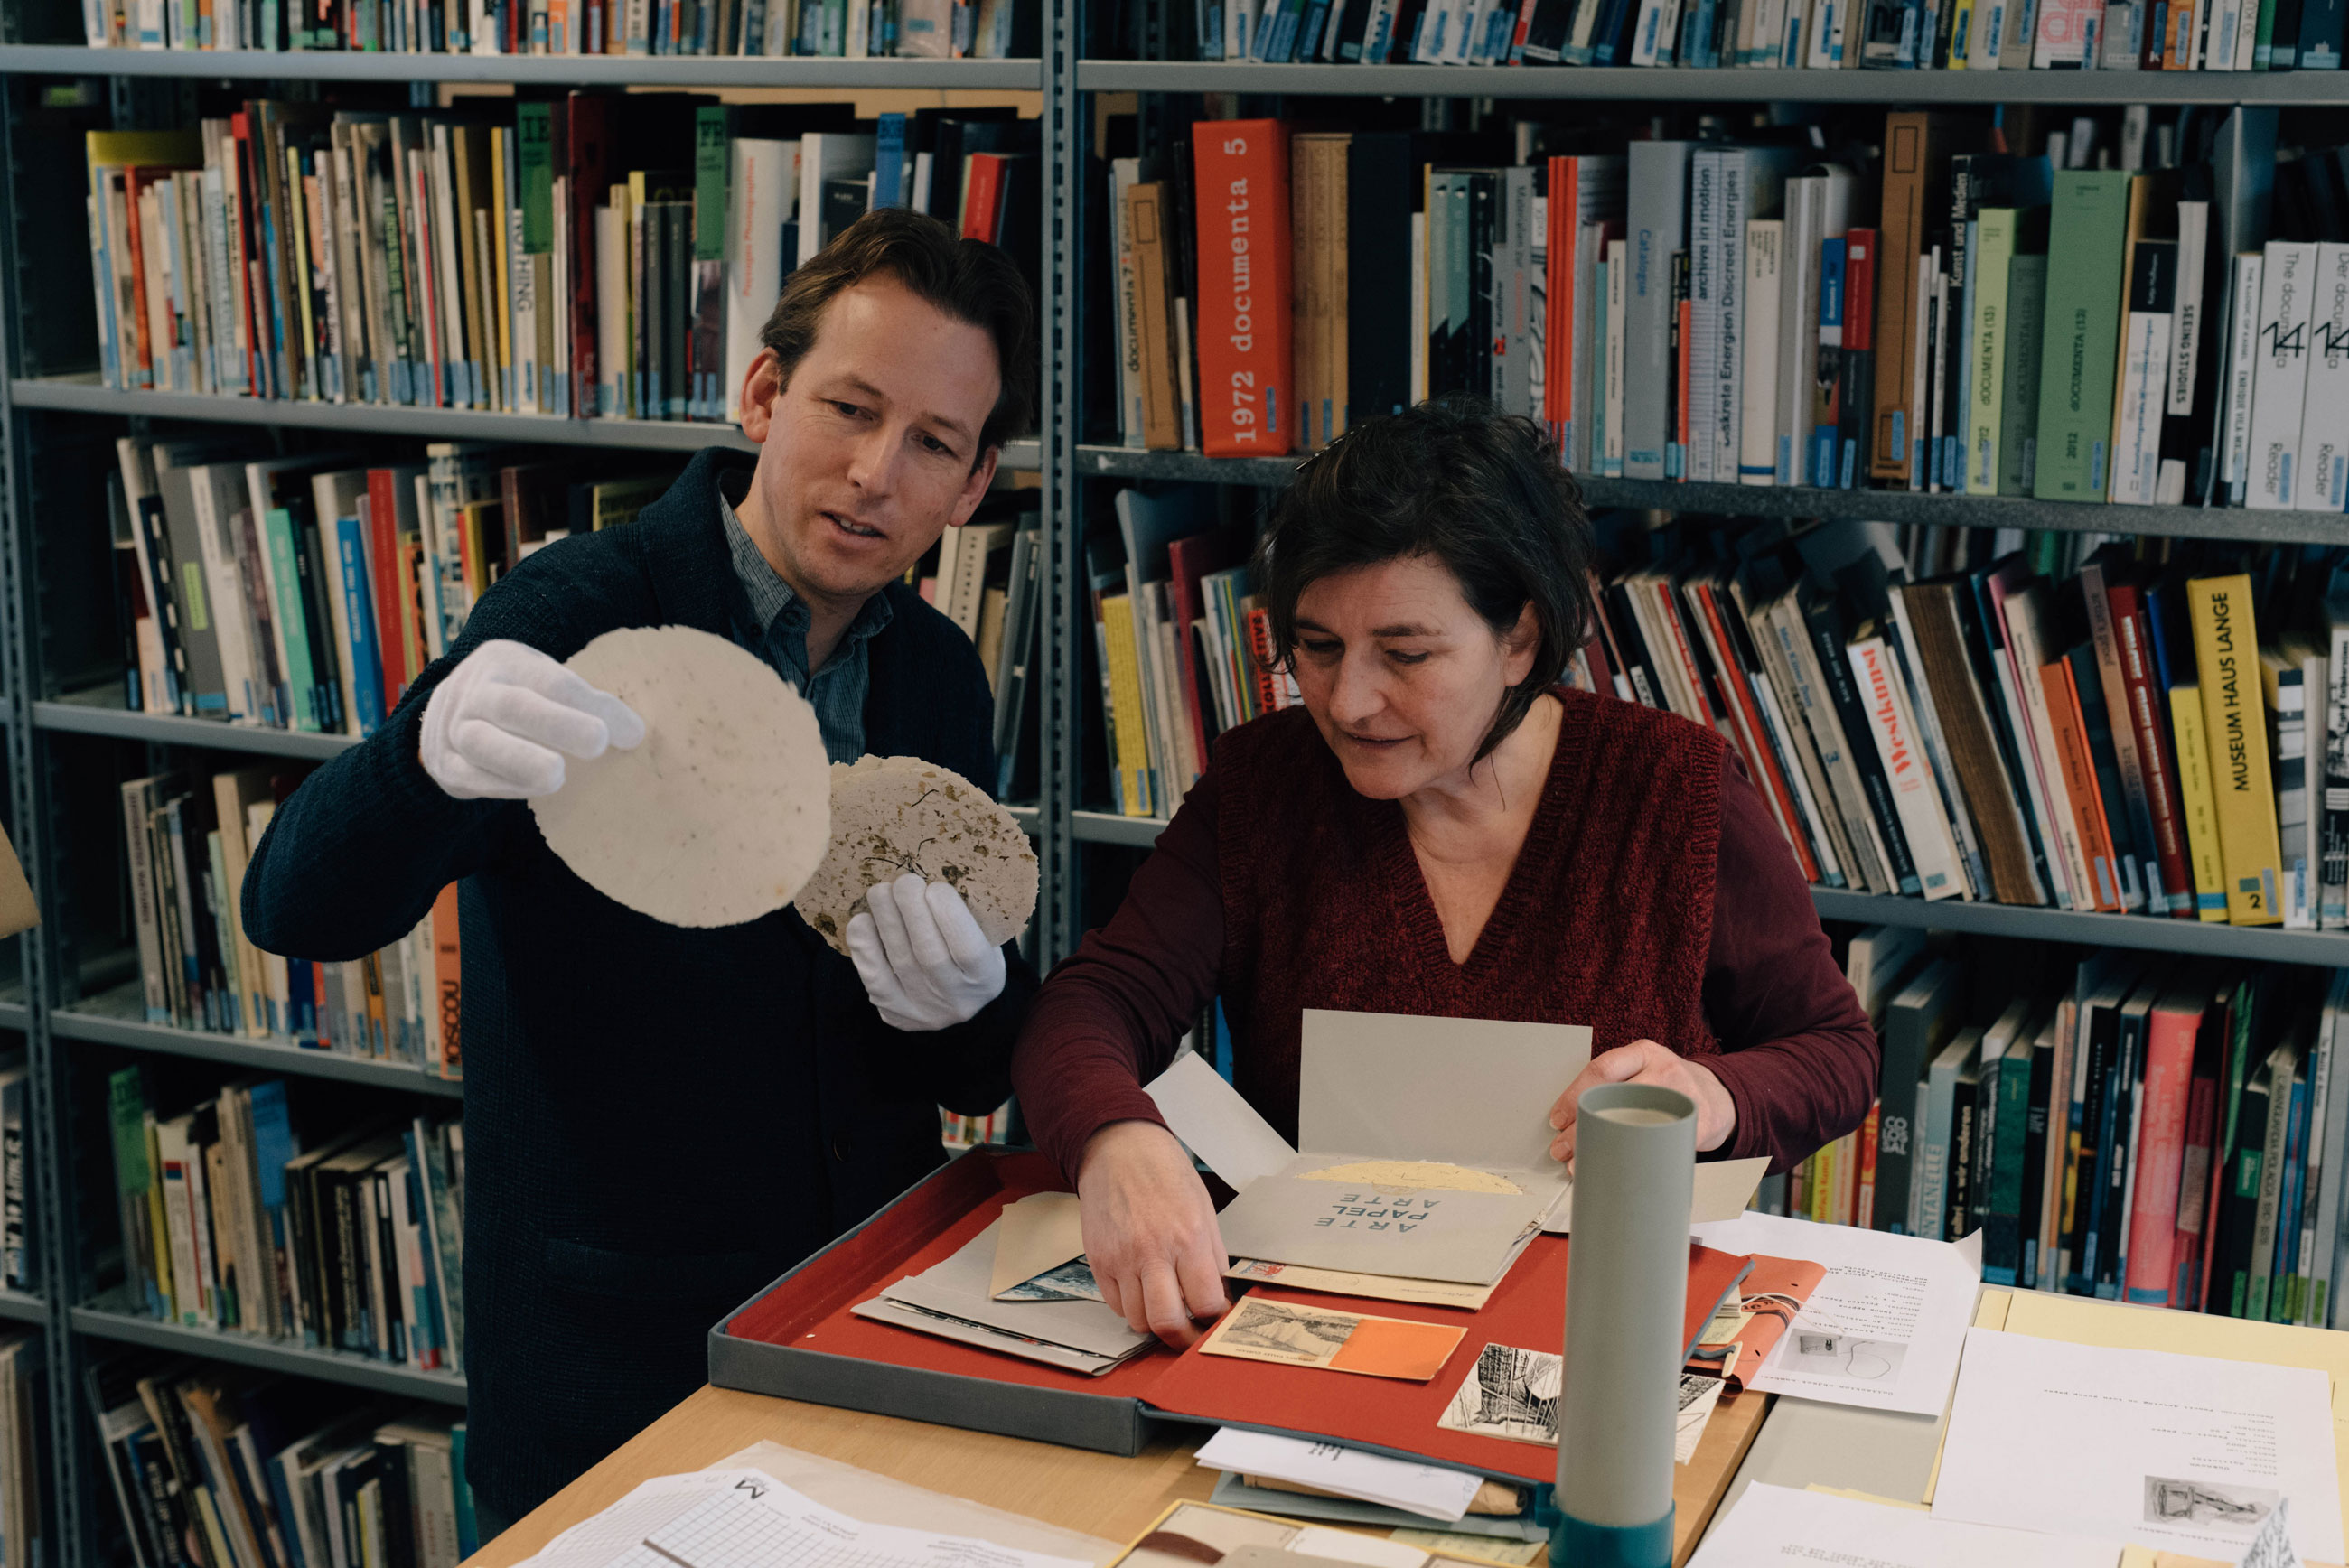 Archaeologist Miguel John Versluys and Nell Donkers at De Appel's Archive, part of the project Landscape with Bear, curated by the De Appel Curatorial Programme.